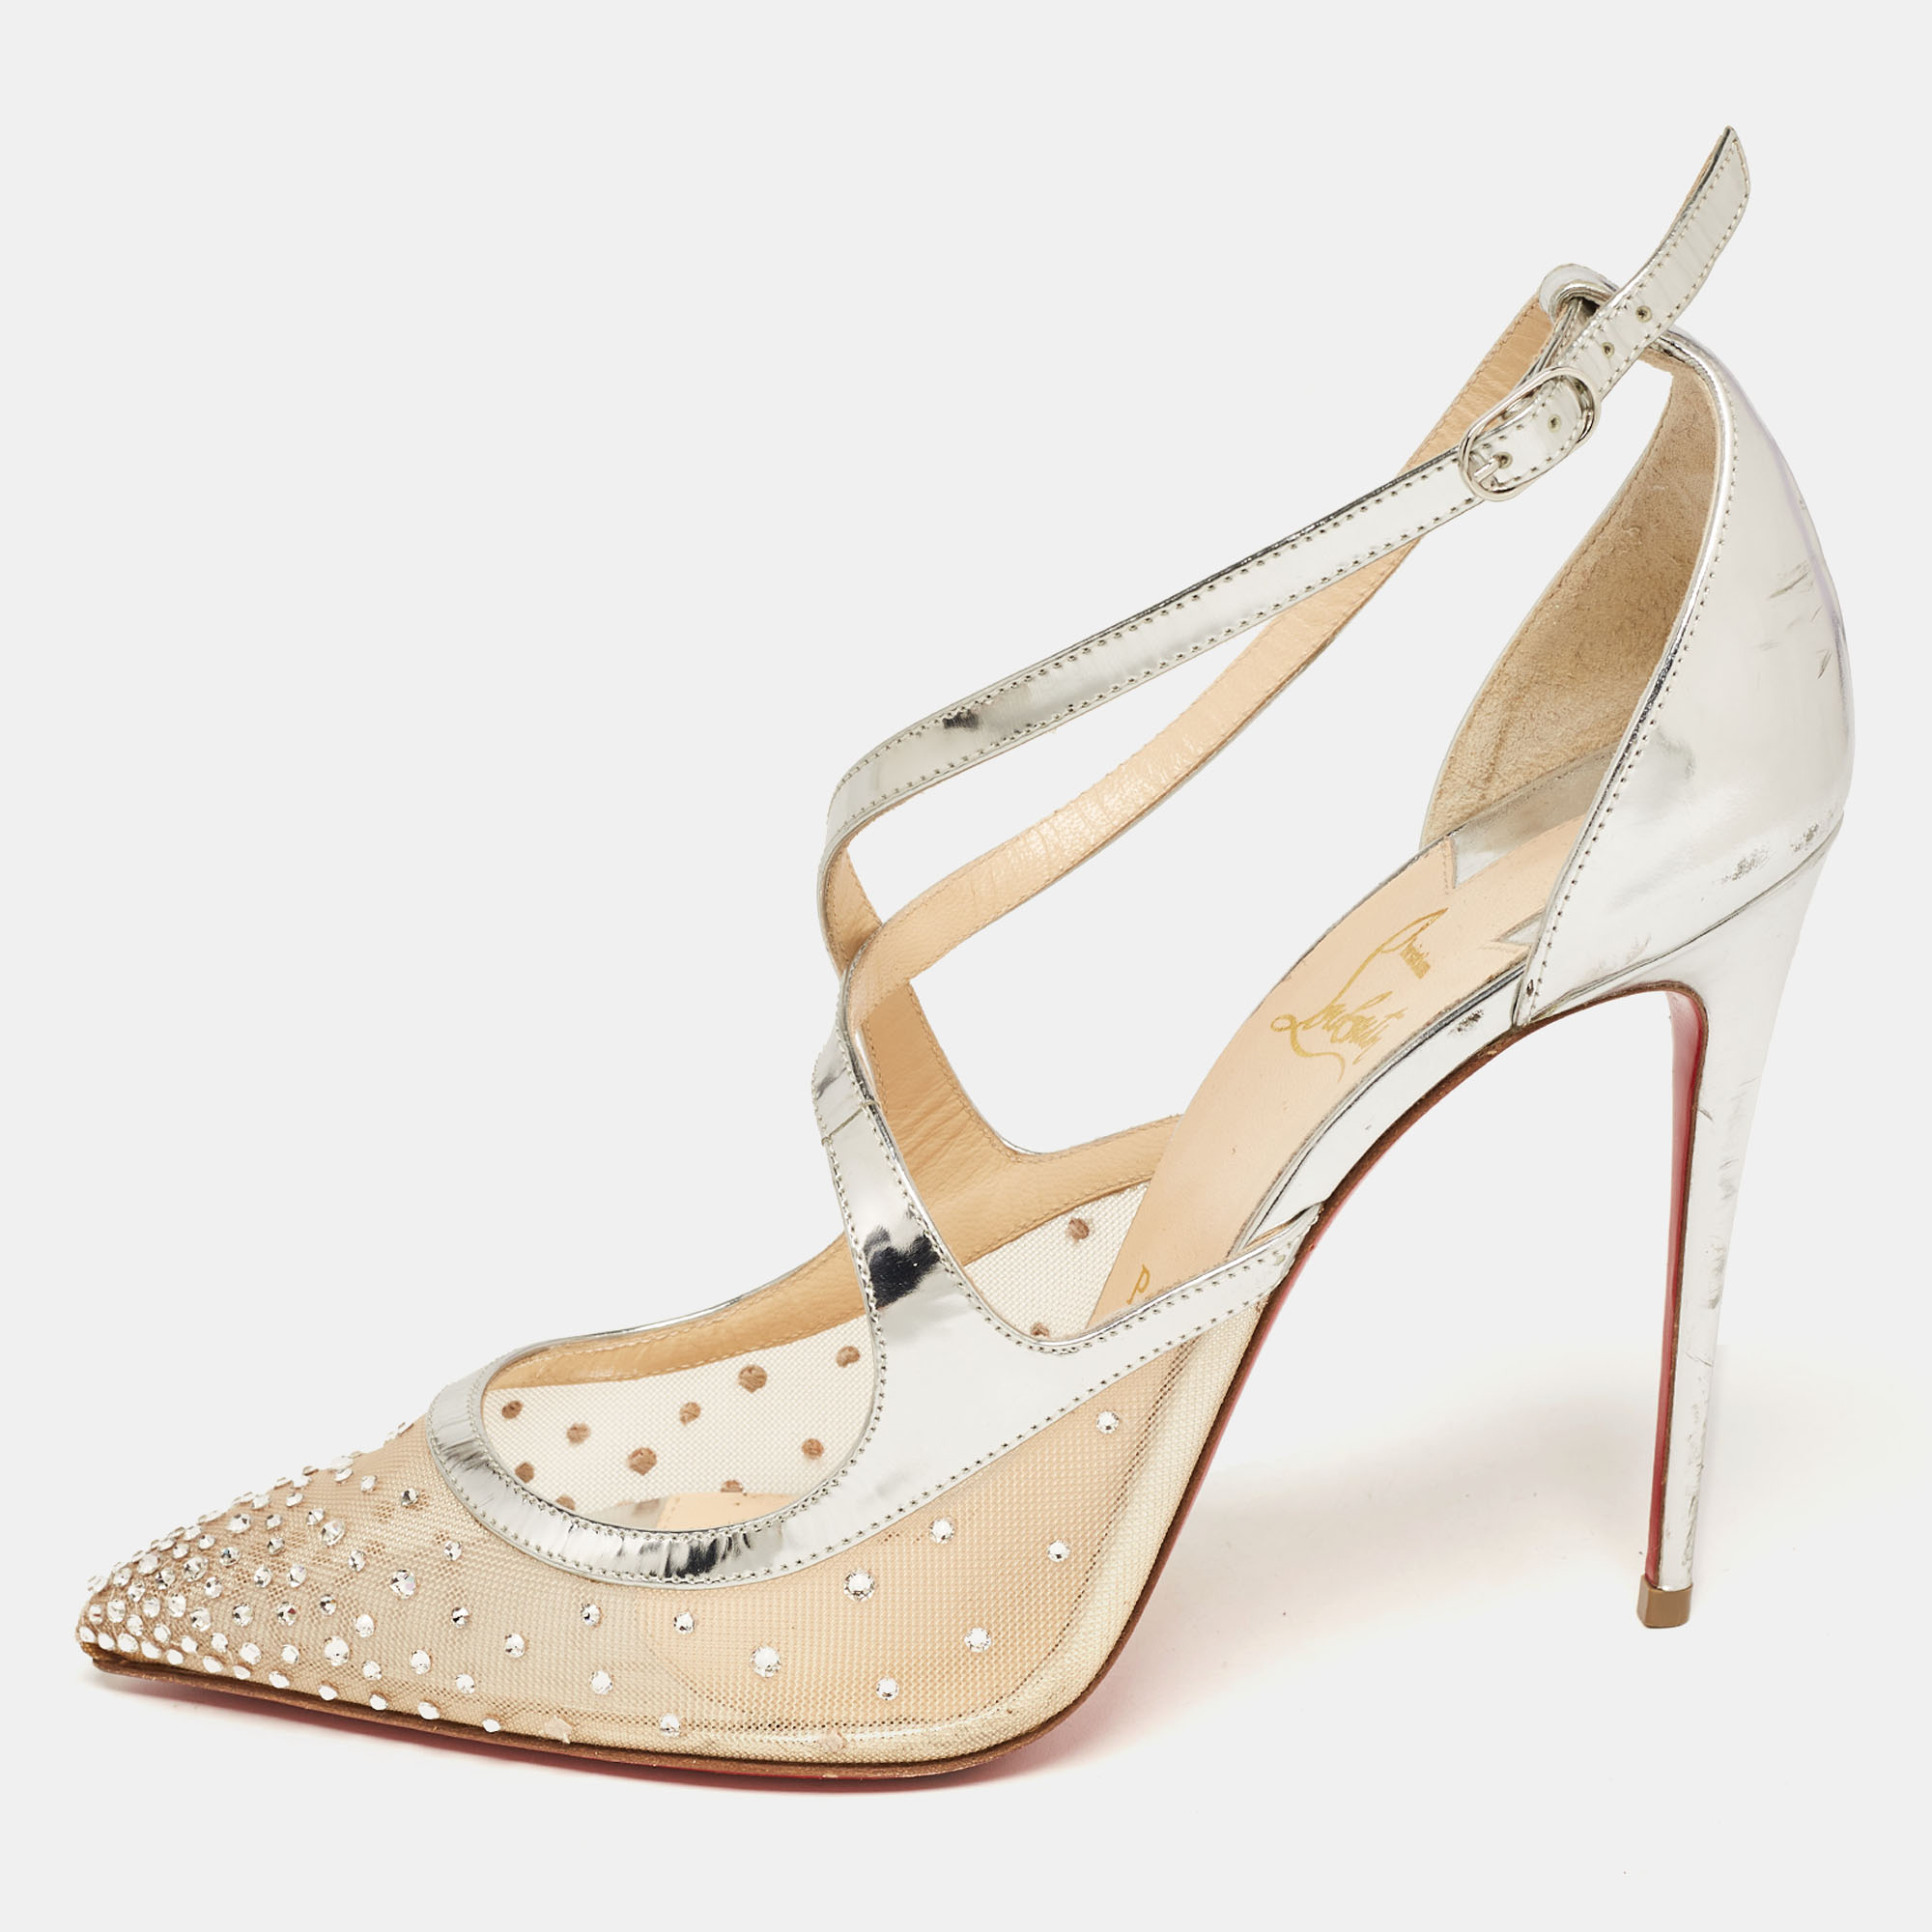 Christian louboutin silver leather and mesh twistissima strass pumps size 40.5